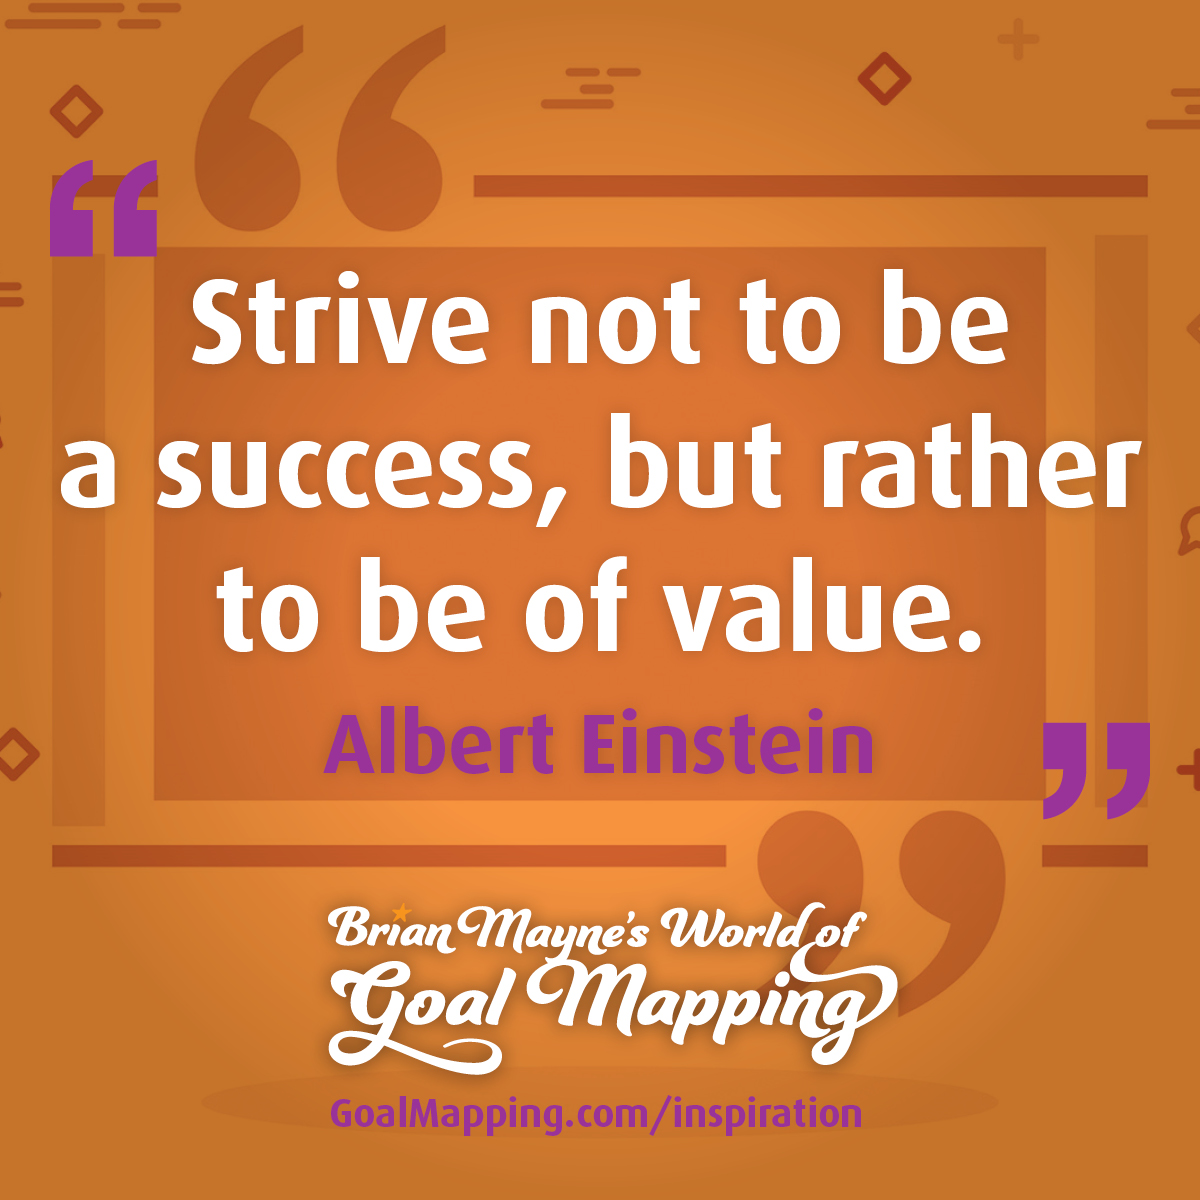 "Strive not to be a success, but rather to be of value." Albert Einstein